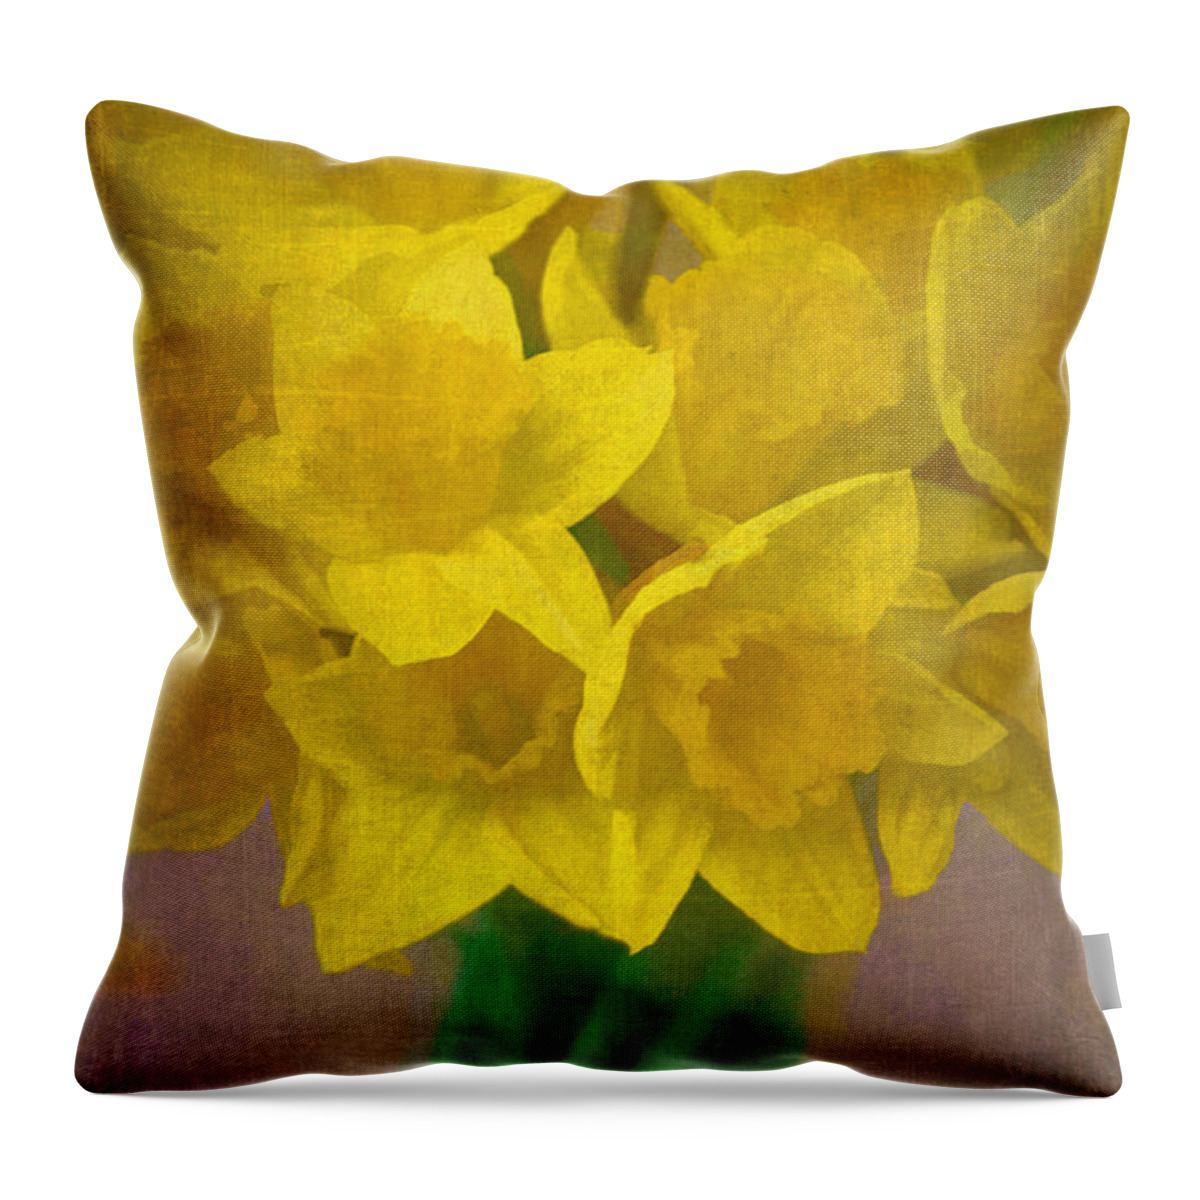 Floral Throw Pillow featuring the photograph Daffodils 10 by Pamela Cooper